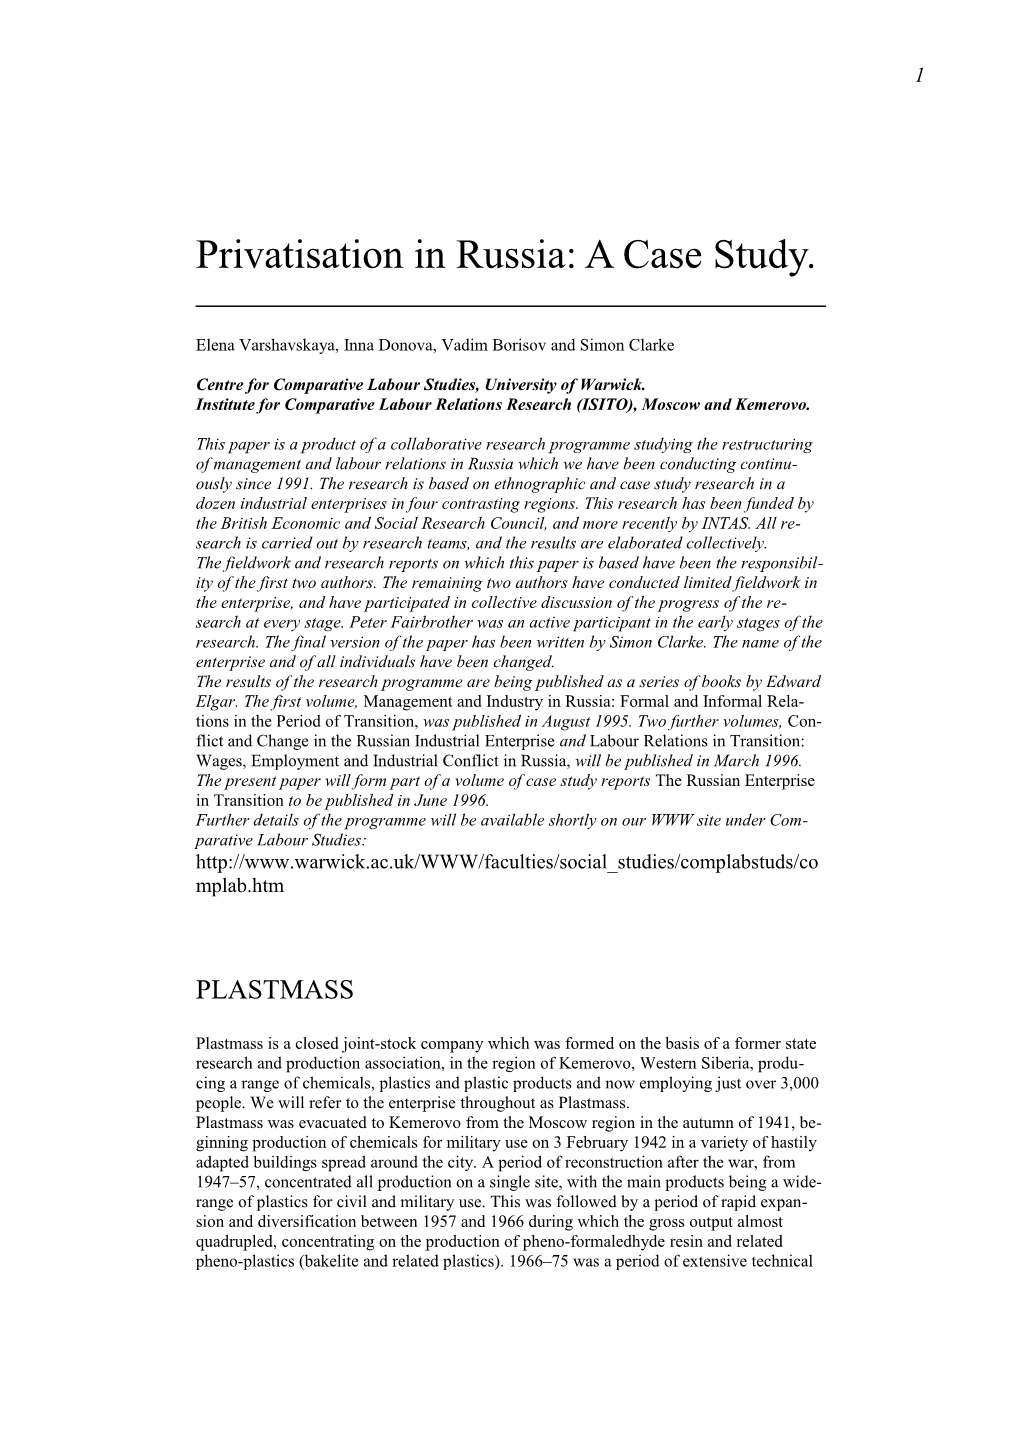 Privatisation in Russia: a Case Study